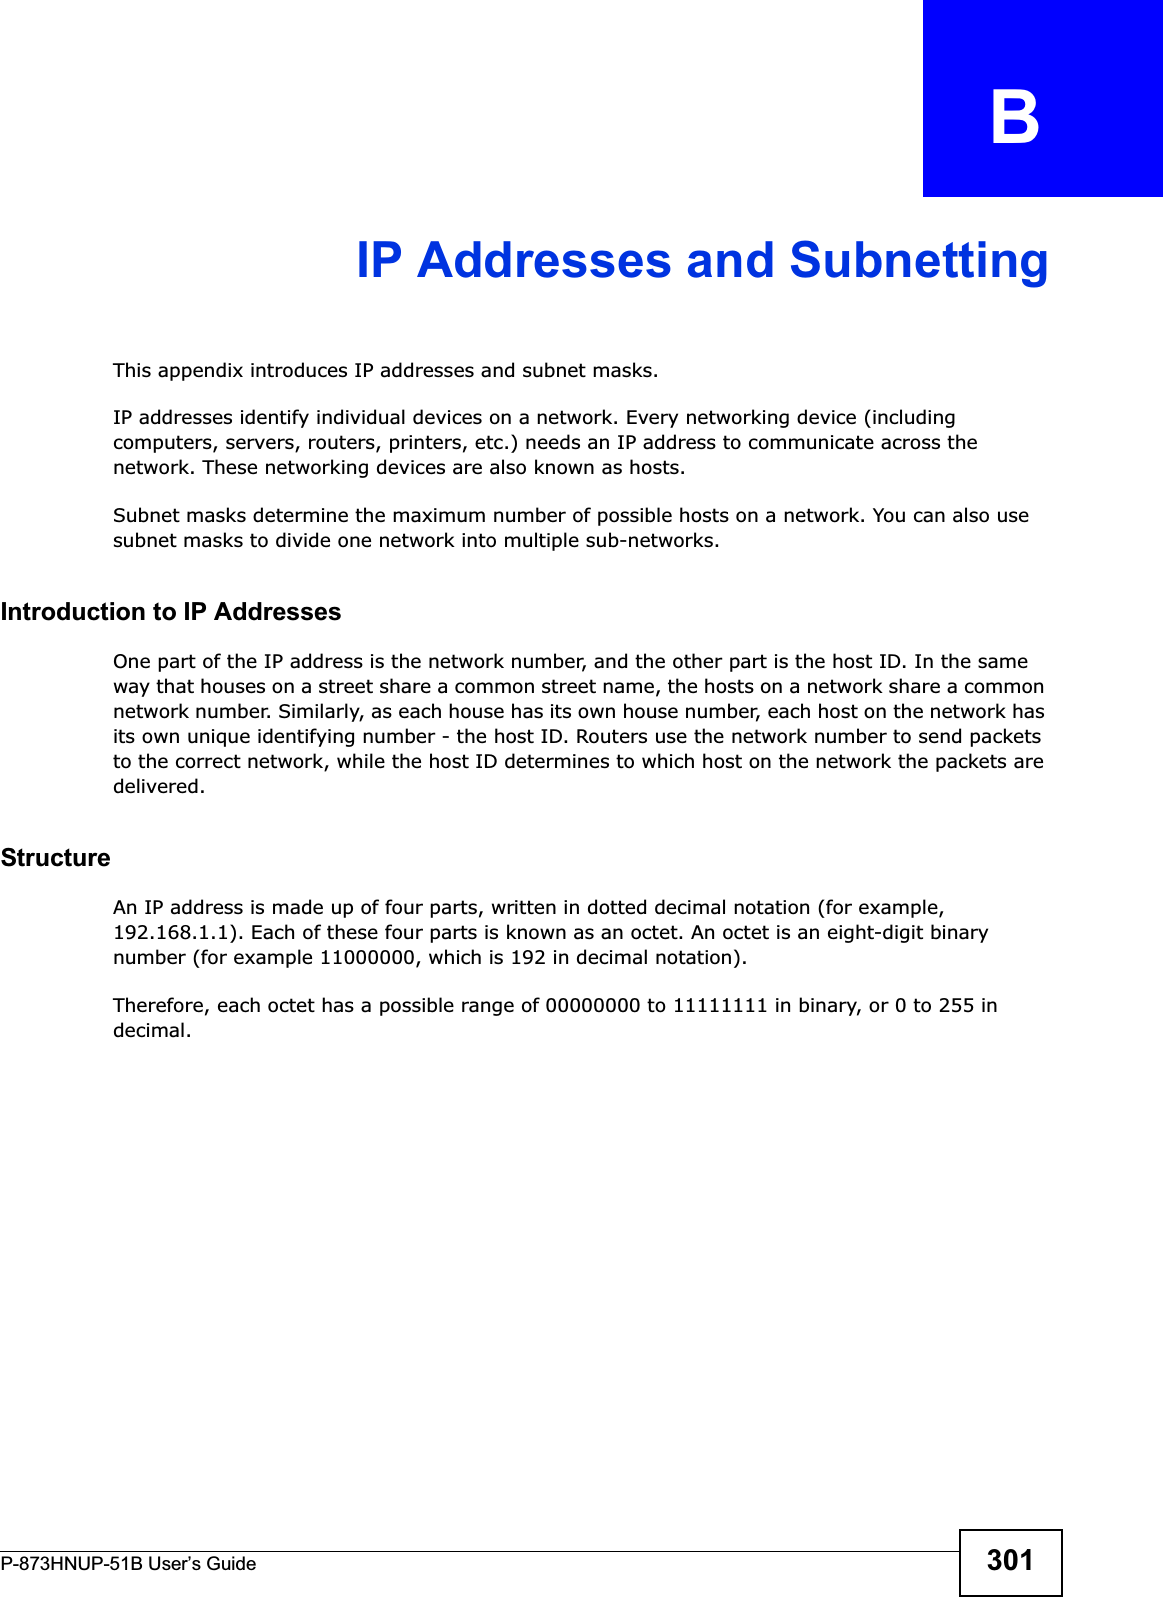 P-873HNUP-51B User’s Guide 301APPENDIX   BIP Addresses and SubnettingThis appendix introduces IP addresses and subnet masks. IP addresses identify individual devices on a network. Every networking device (including computers, servers, routers, printers, etc.) needs an IP address to communicate across the network. These networking devices are also known as hosts.Subnet masks determine the maximum number of possible hosts on a network. You can also use subnet masks to divide one network into multiple sub-networks.Introduction to IP AddressesOne part of the IP address is the network number, and the other part is the host ID. In the same way that houses on a street share a common street name, the hosts on a network share a common network number. Similarly, as each house has its own house number, each host on the network has its own unique identifying number - the host ID. Routers use the network number to send packets to the correct network, while the host ID determines to which host on the network the packets are delivered.StructureAn IP address is made up of four parts, written in dotted decimal notation (for example, 192.168.1.1). Each of these four parts is known as an octet. An octet is an eight-digit binary number (for example 11000000, which is 192 in decimal notation). Therefore, each octet has a possible range of 00000000 to 11111111 in binary, or 0 to 255 in decimal.